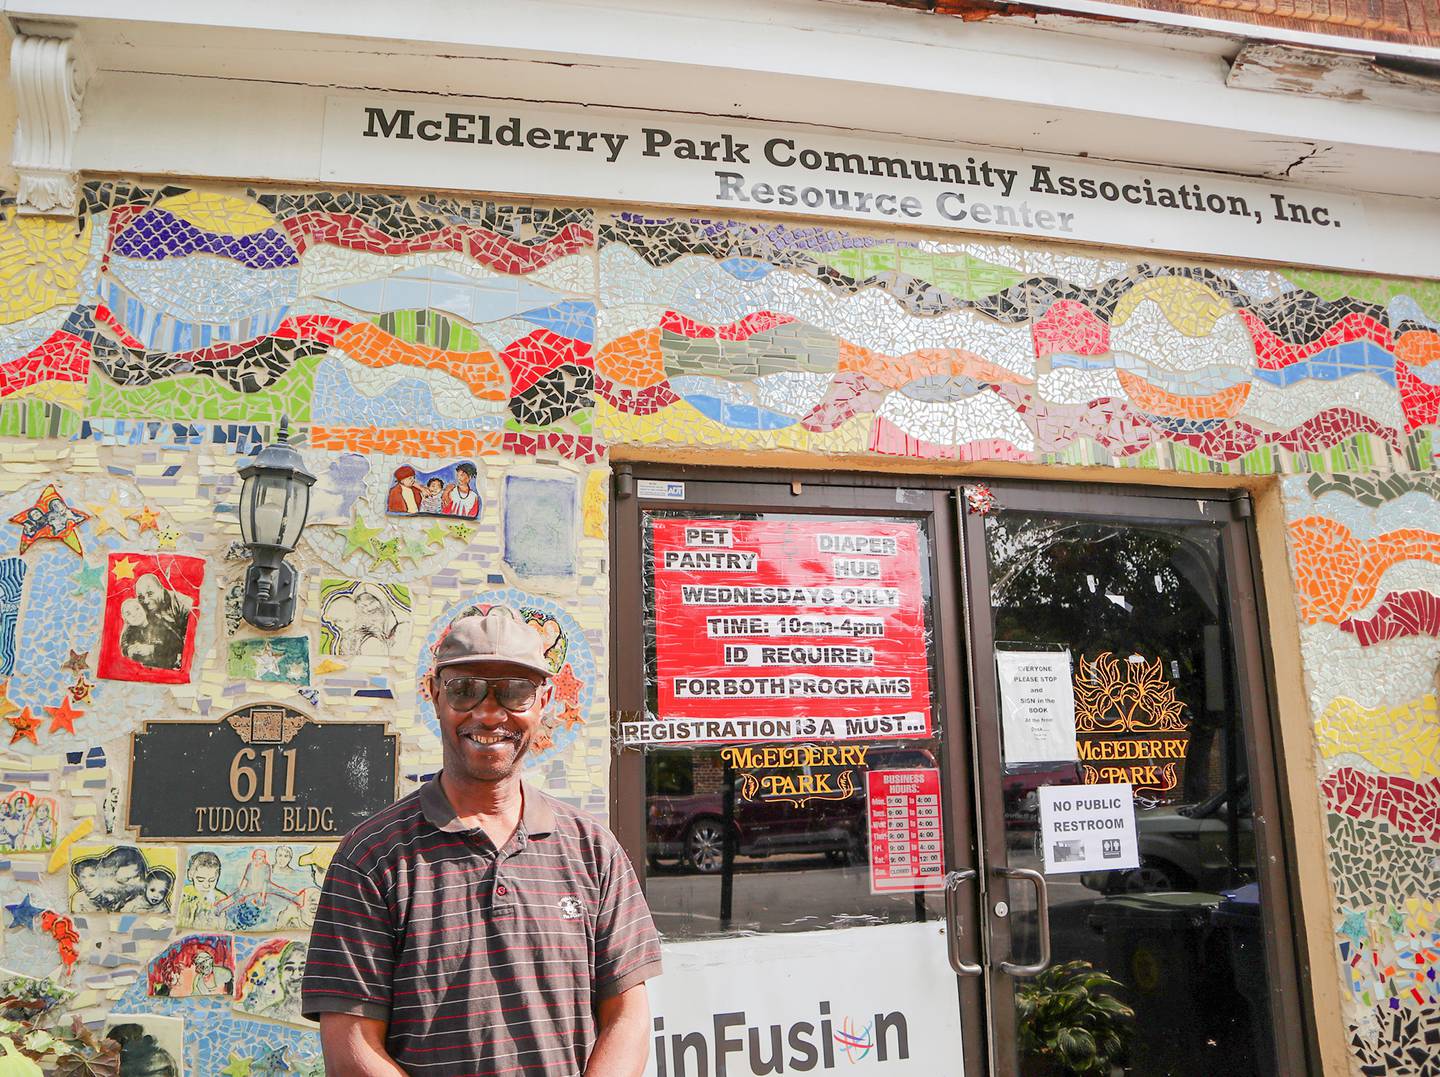 Ernest Smith, 62, stands in front of the McElderry Park Community Association's resource center on North Montford Avenue.